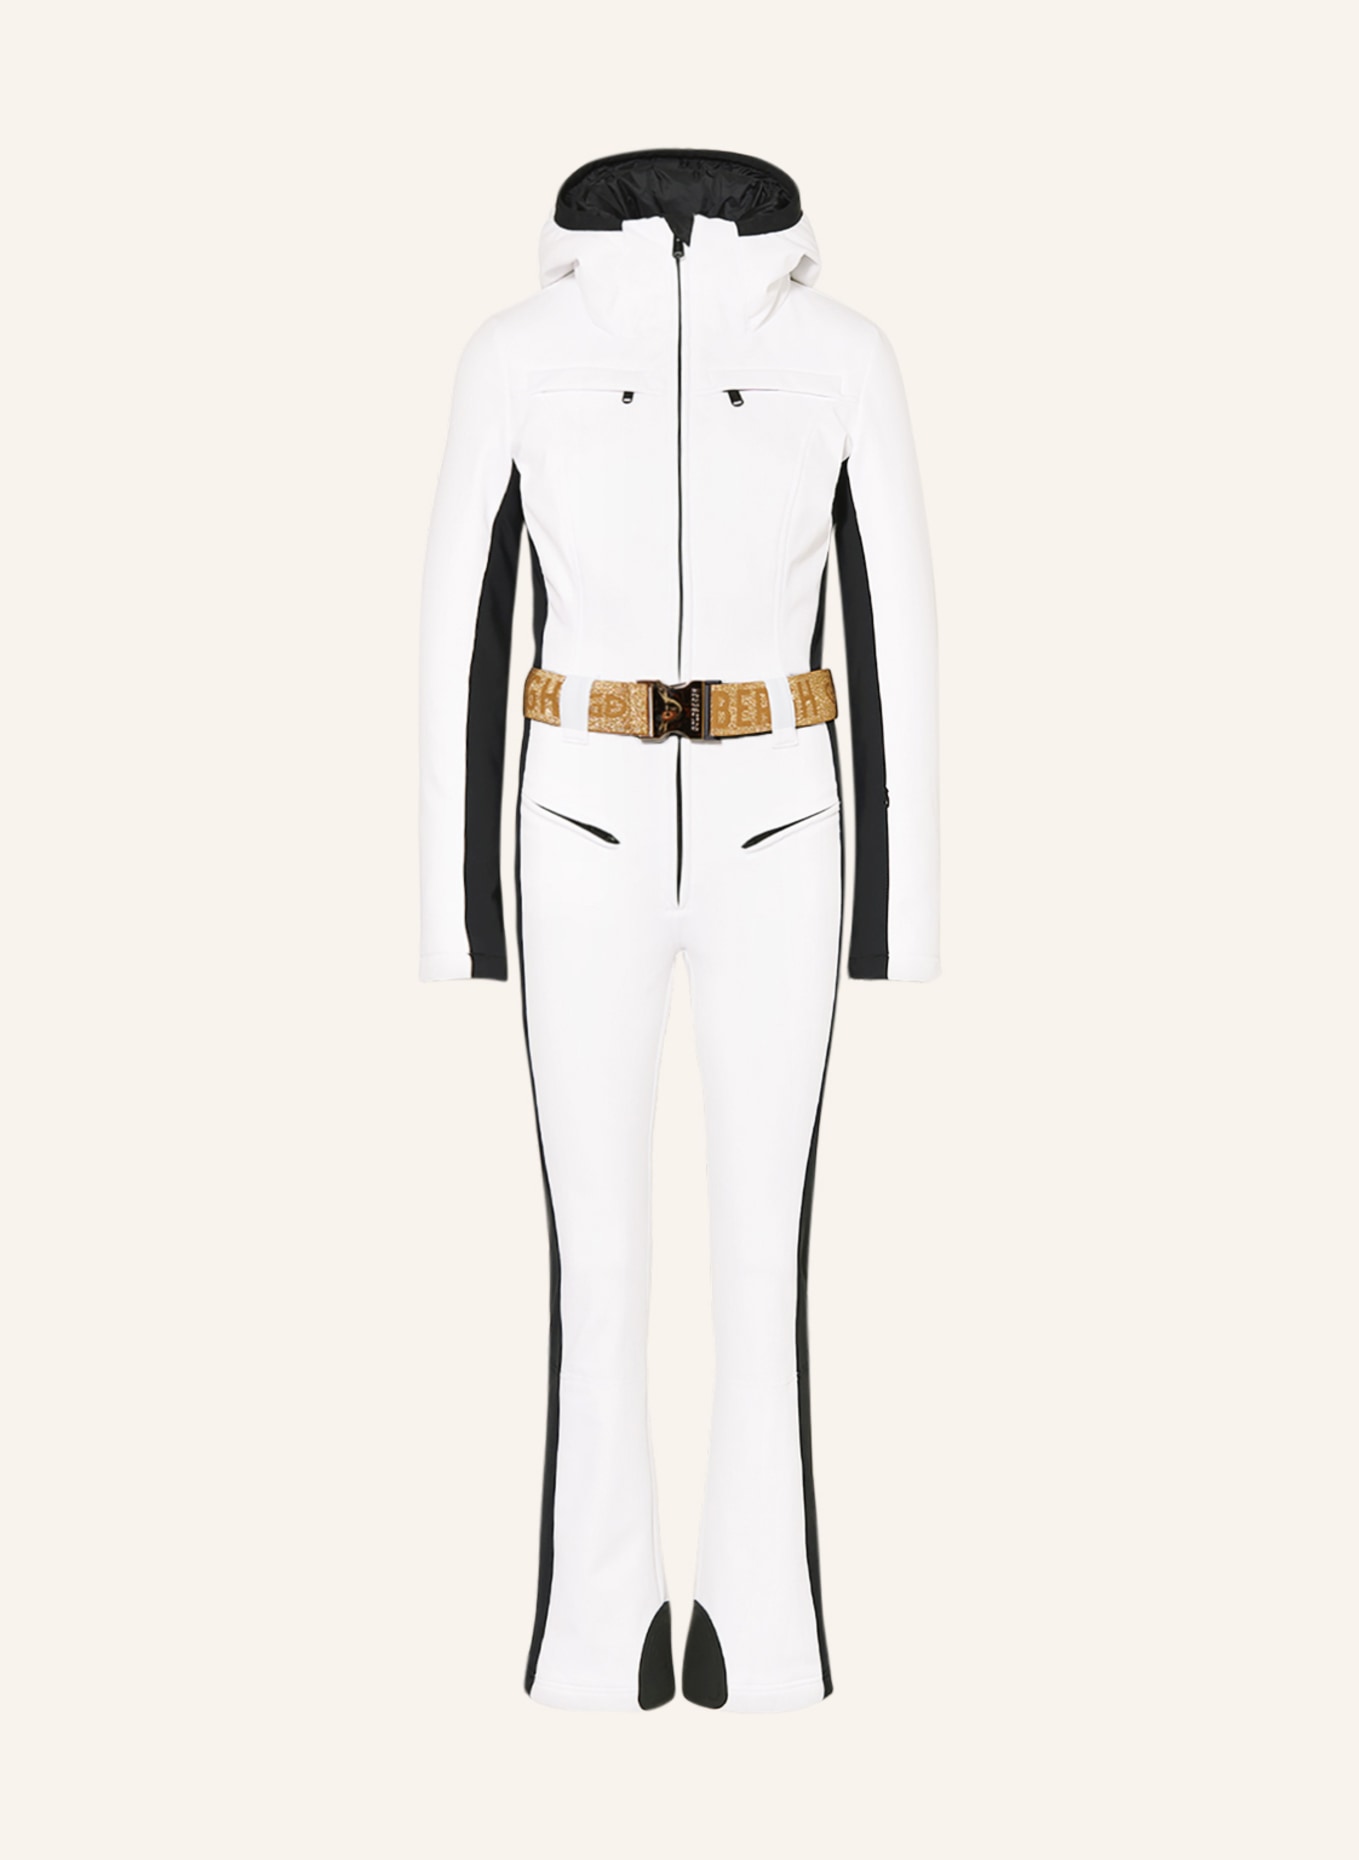 Parry ski suit in white - Goldbergh